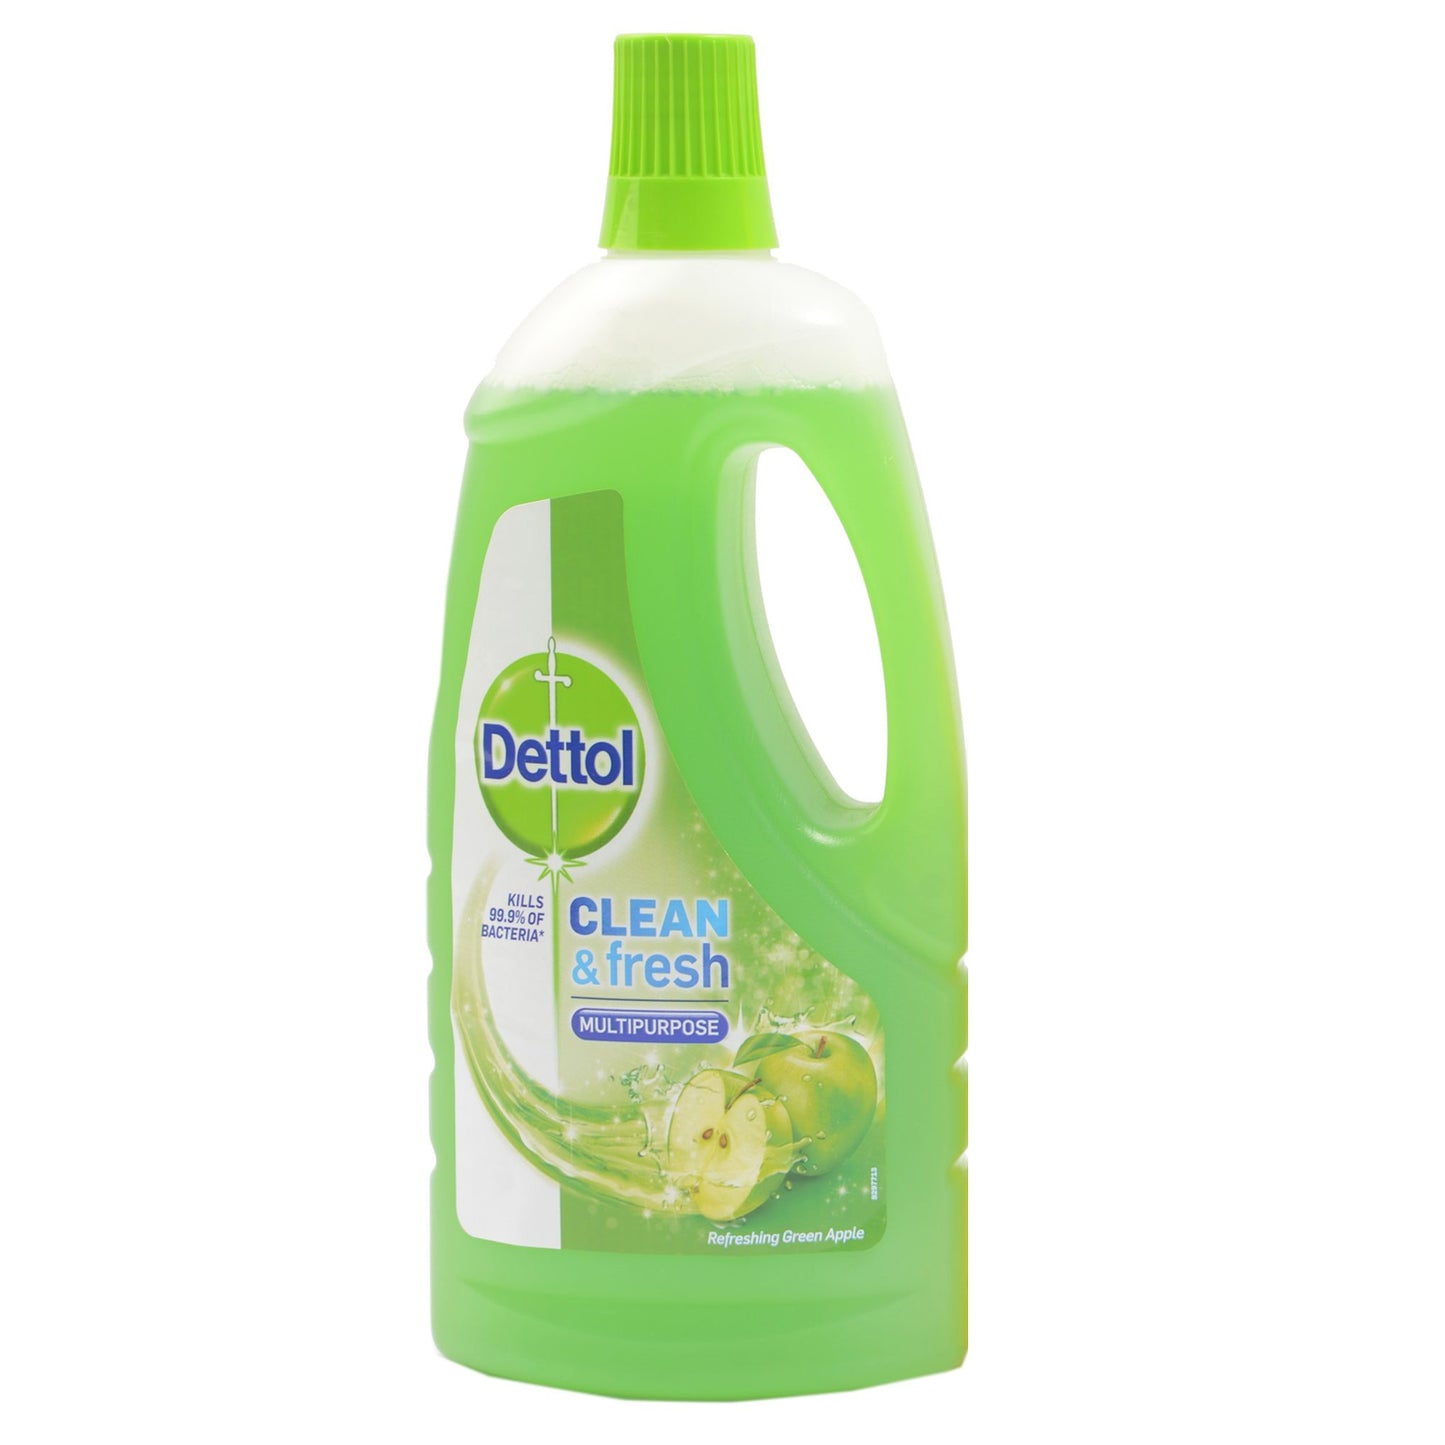 Dettol - Multipurpose & Surface Cleaner - Clean & Fresh - Refreshing Green Apple -1000 ML (1L) - Imported